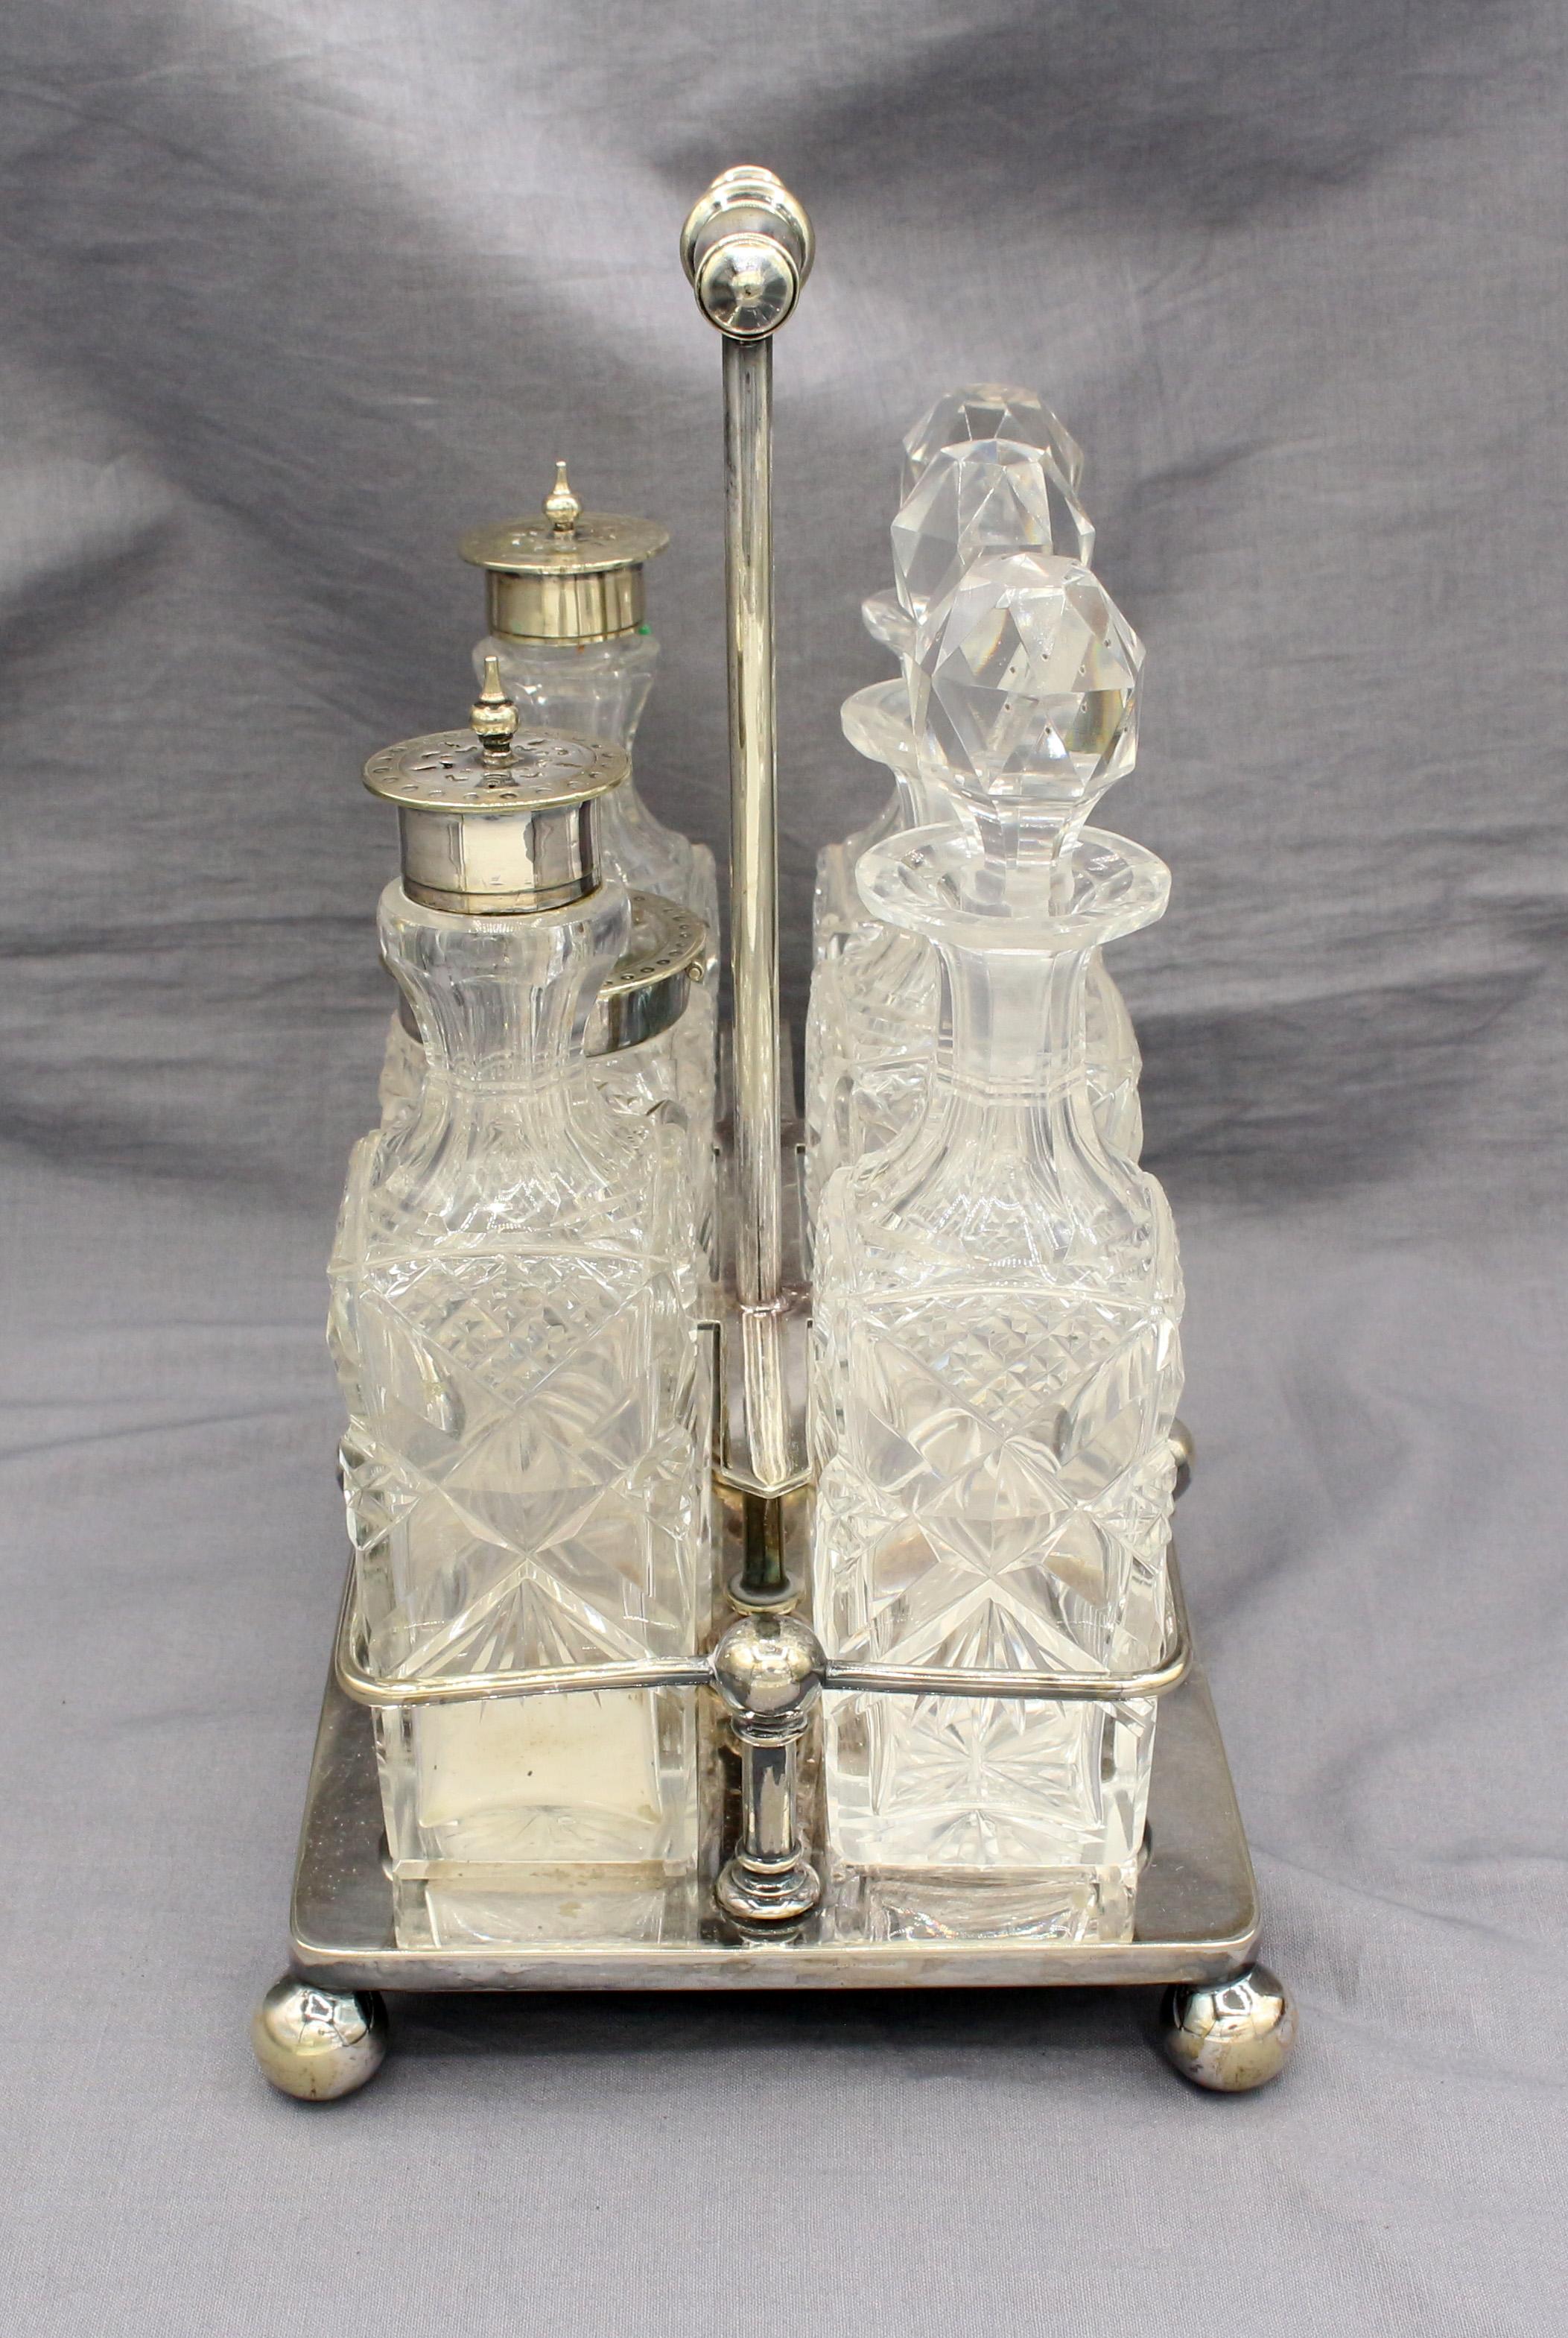 Silver on nickle & cut glass 6 bottle cruet stand, c.1880s, English. All original, fine condition bottles. Some nickle showing.
8